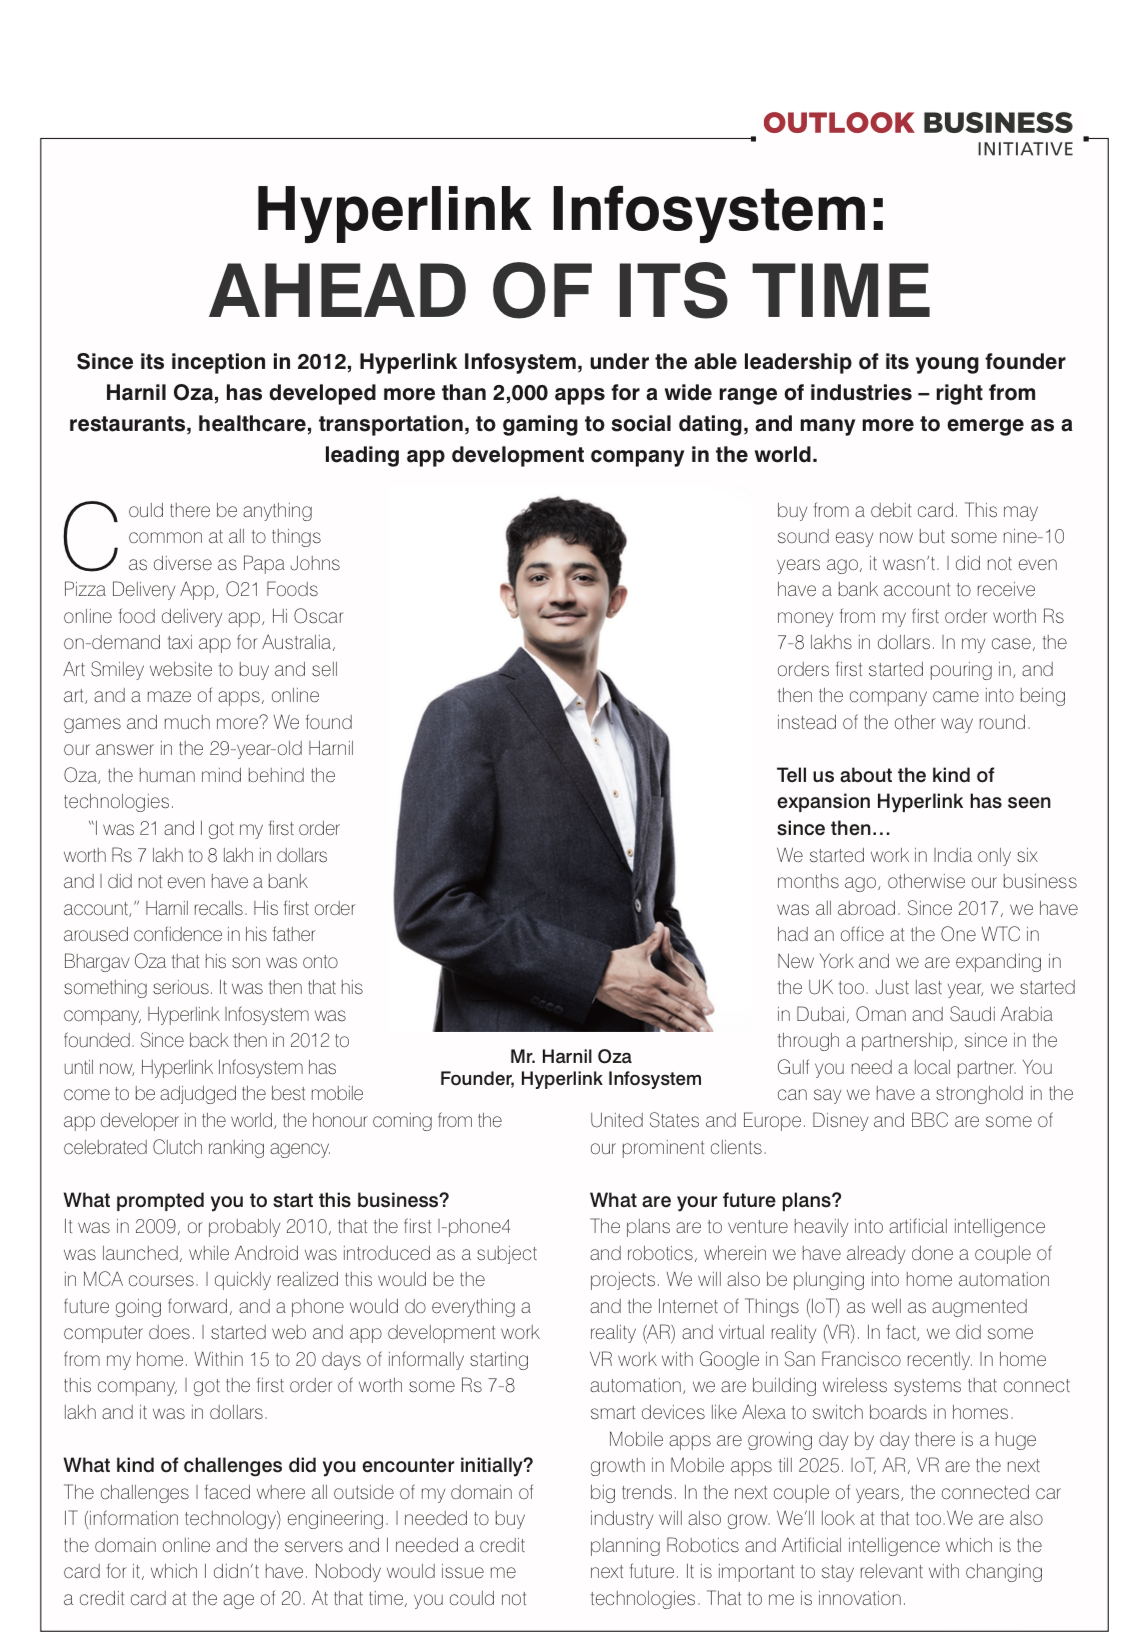 interview of harnil oza at outlook business magazine